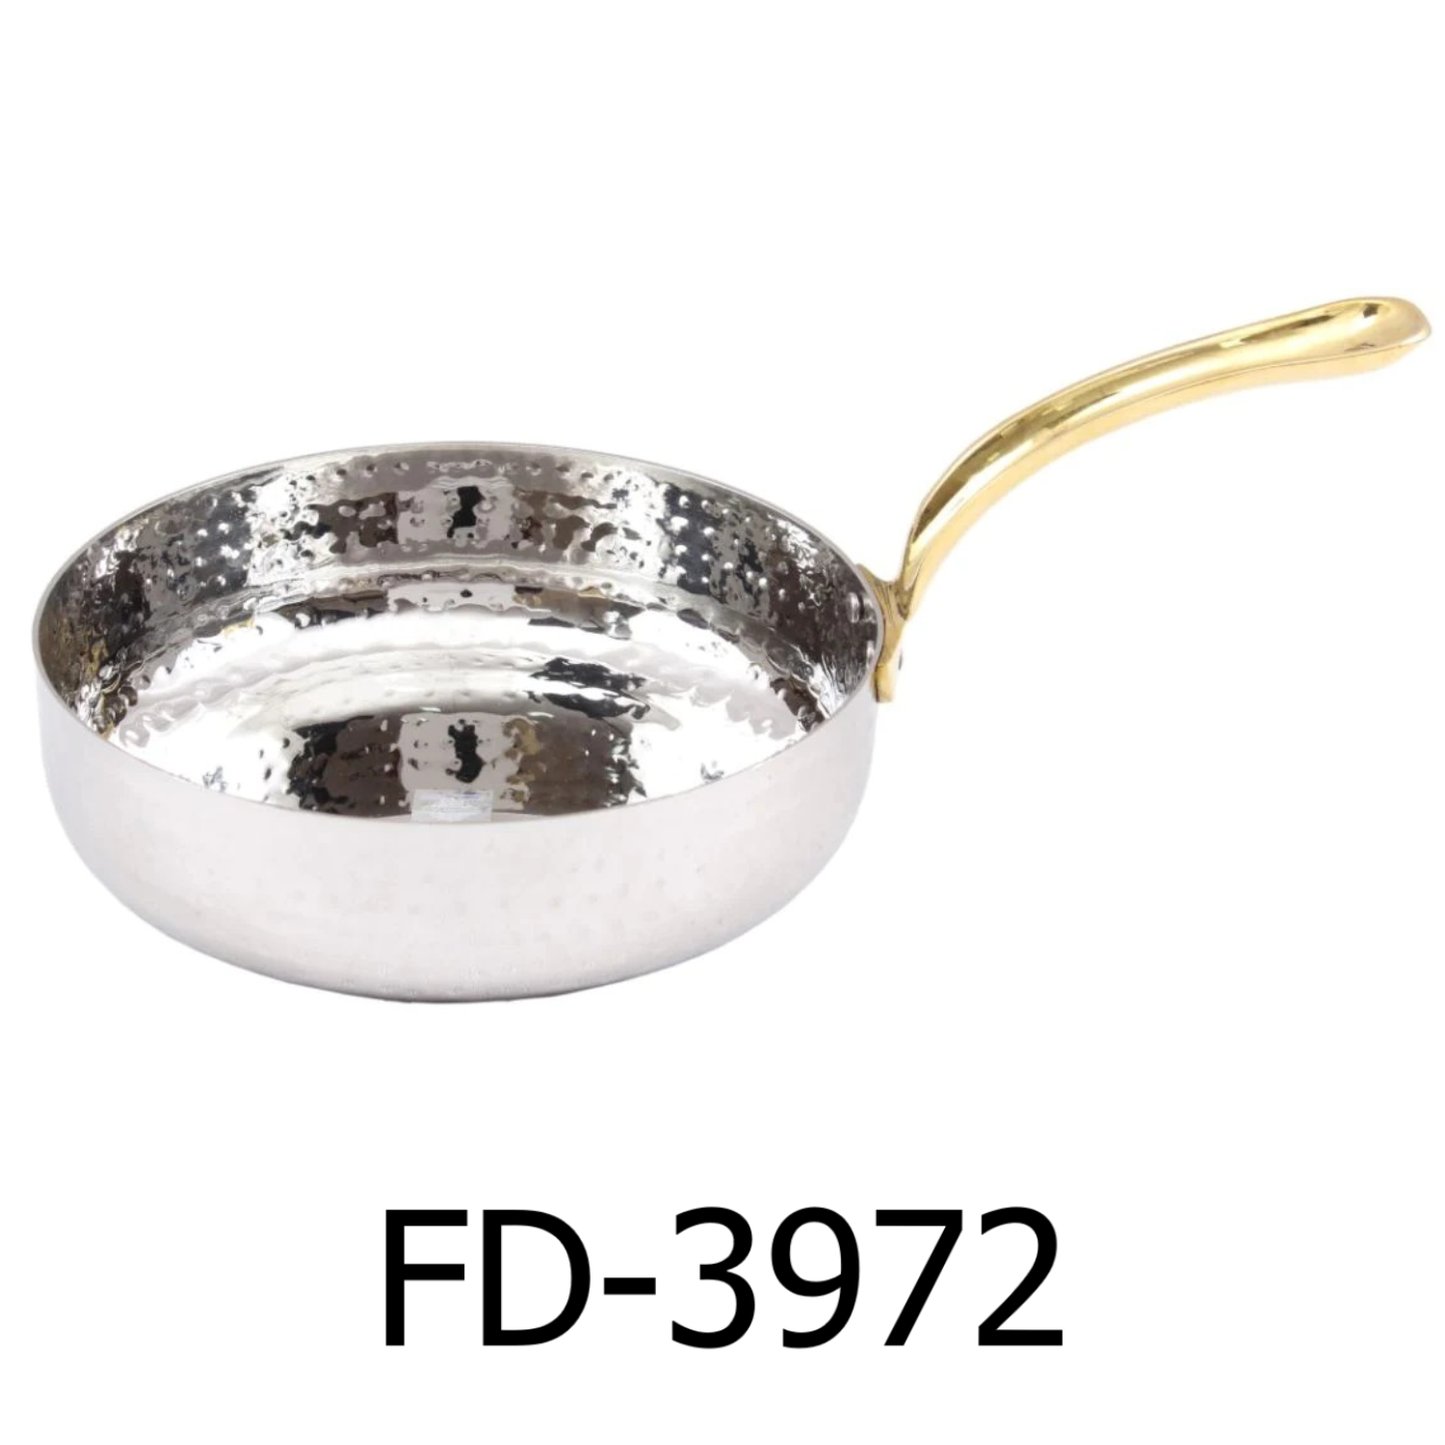 4.75" Stainless Steel Hammered Mini Fry Pan with Brass Handle